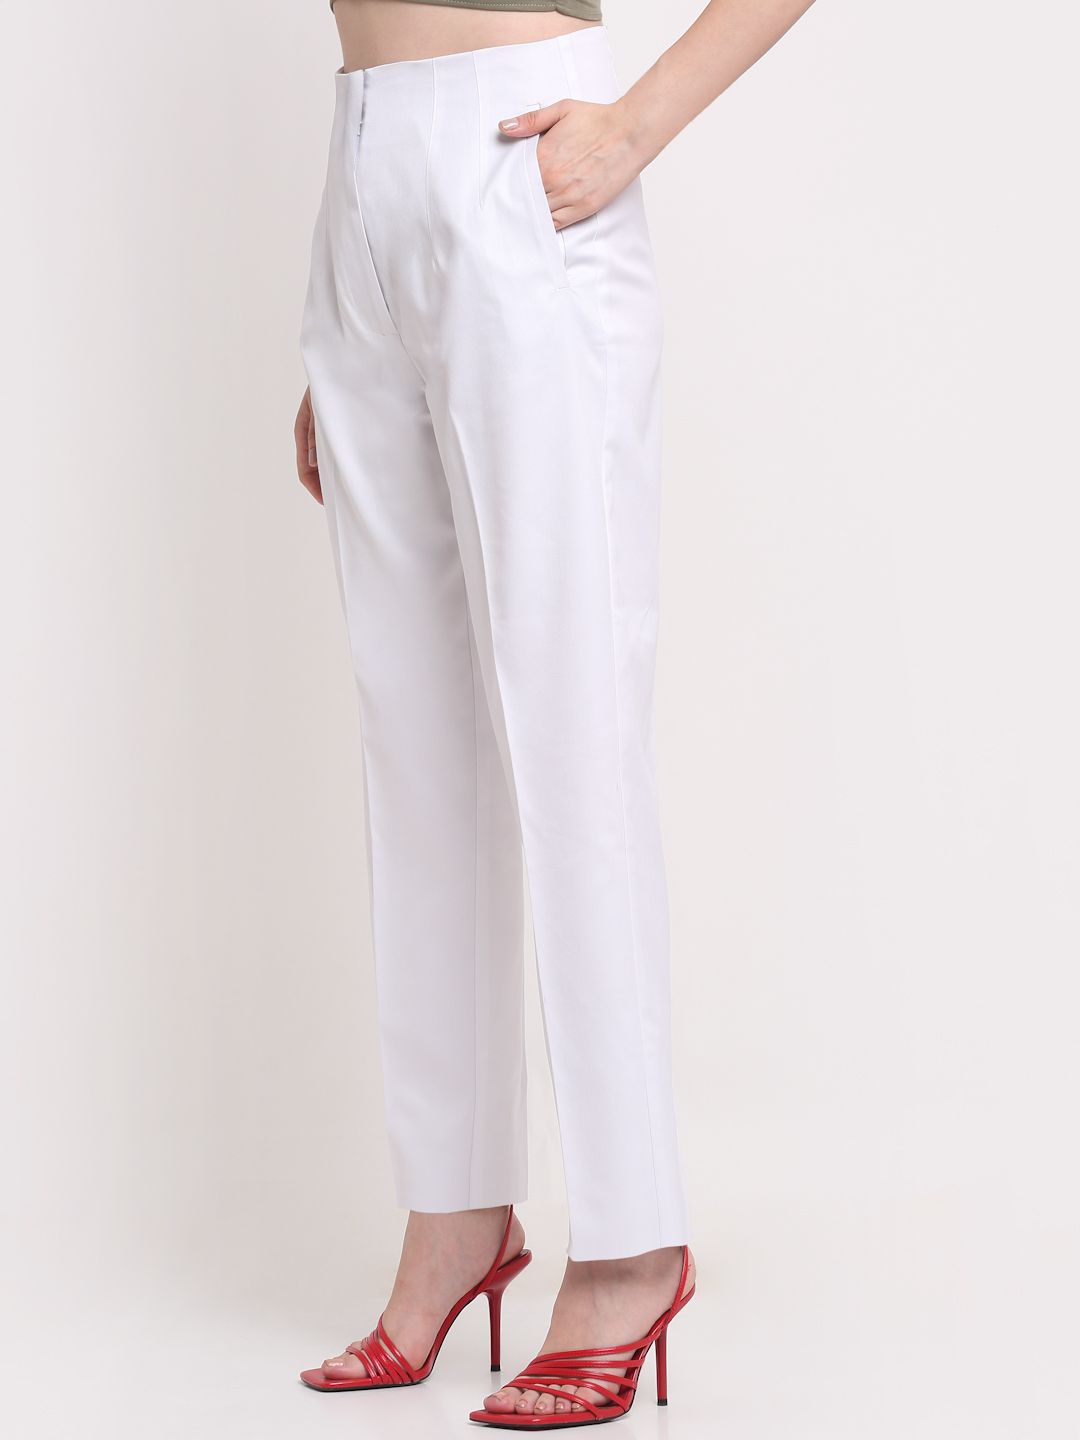 Women Viscose Lycra Solid White trousers